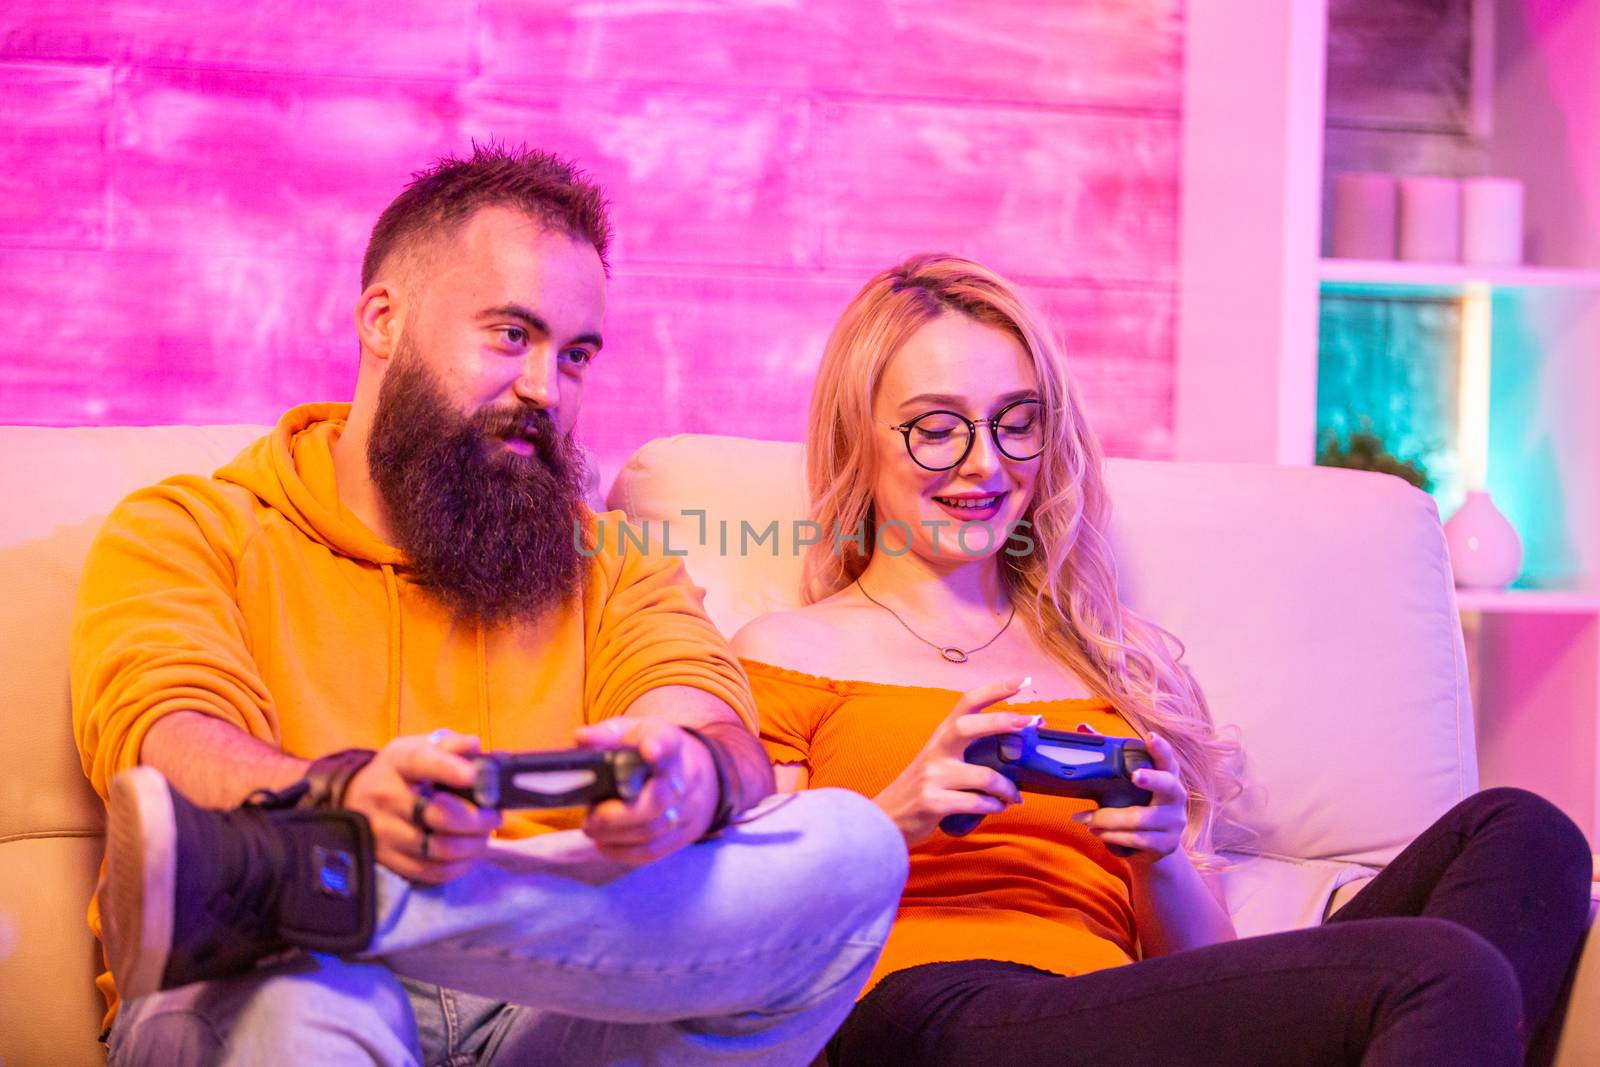 Beautiful blonde girl smiling while playing video games by DCStudio